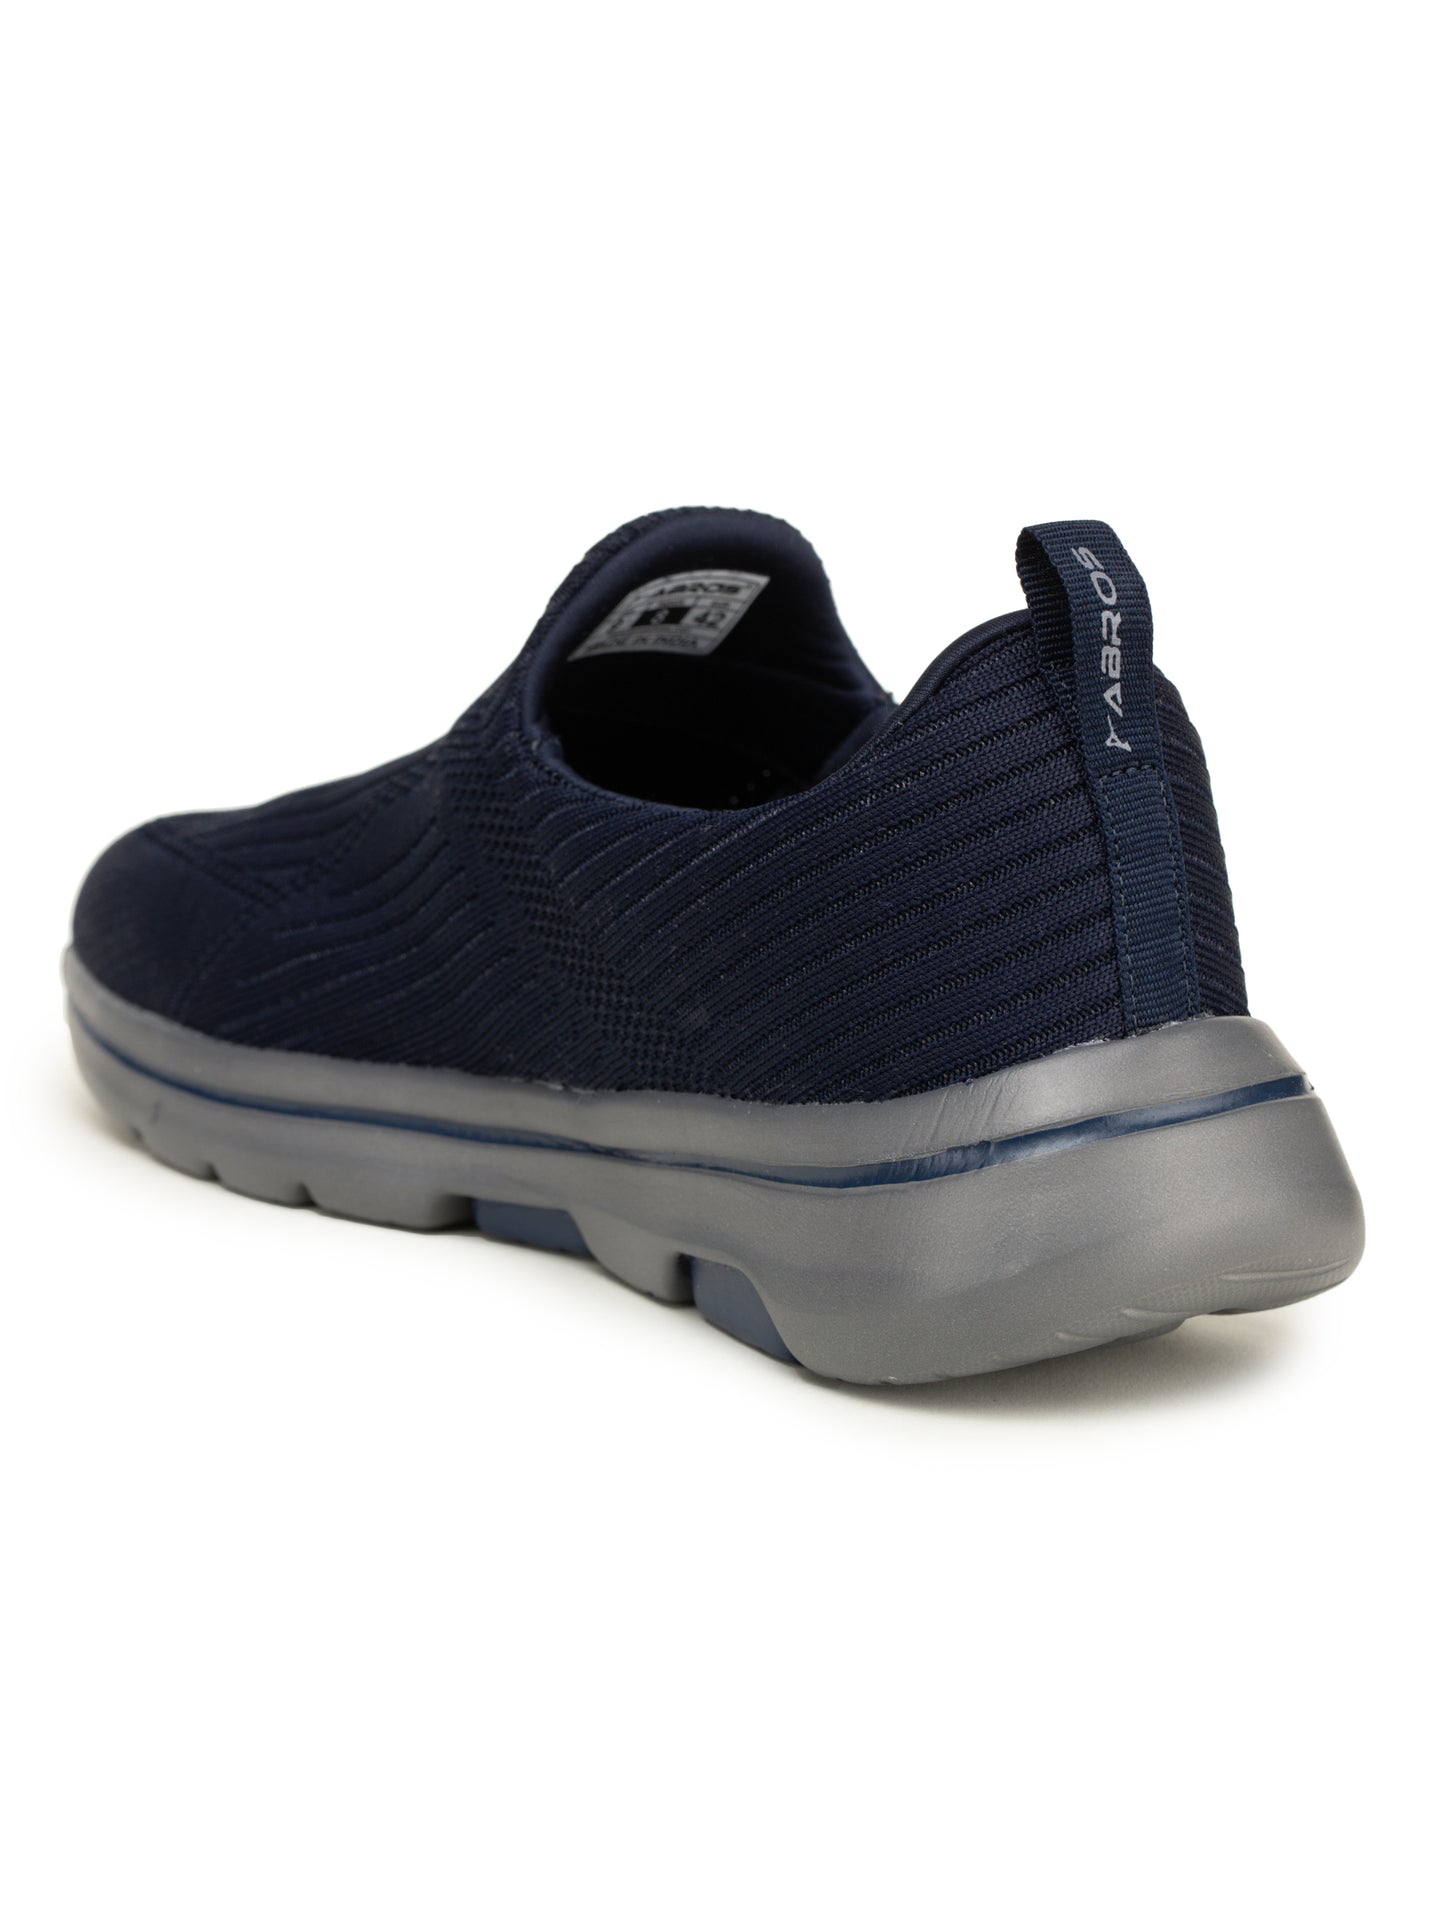 ABROS CANBERRA SPORT-SHOES For MEN'S